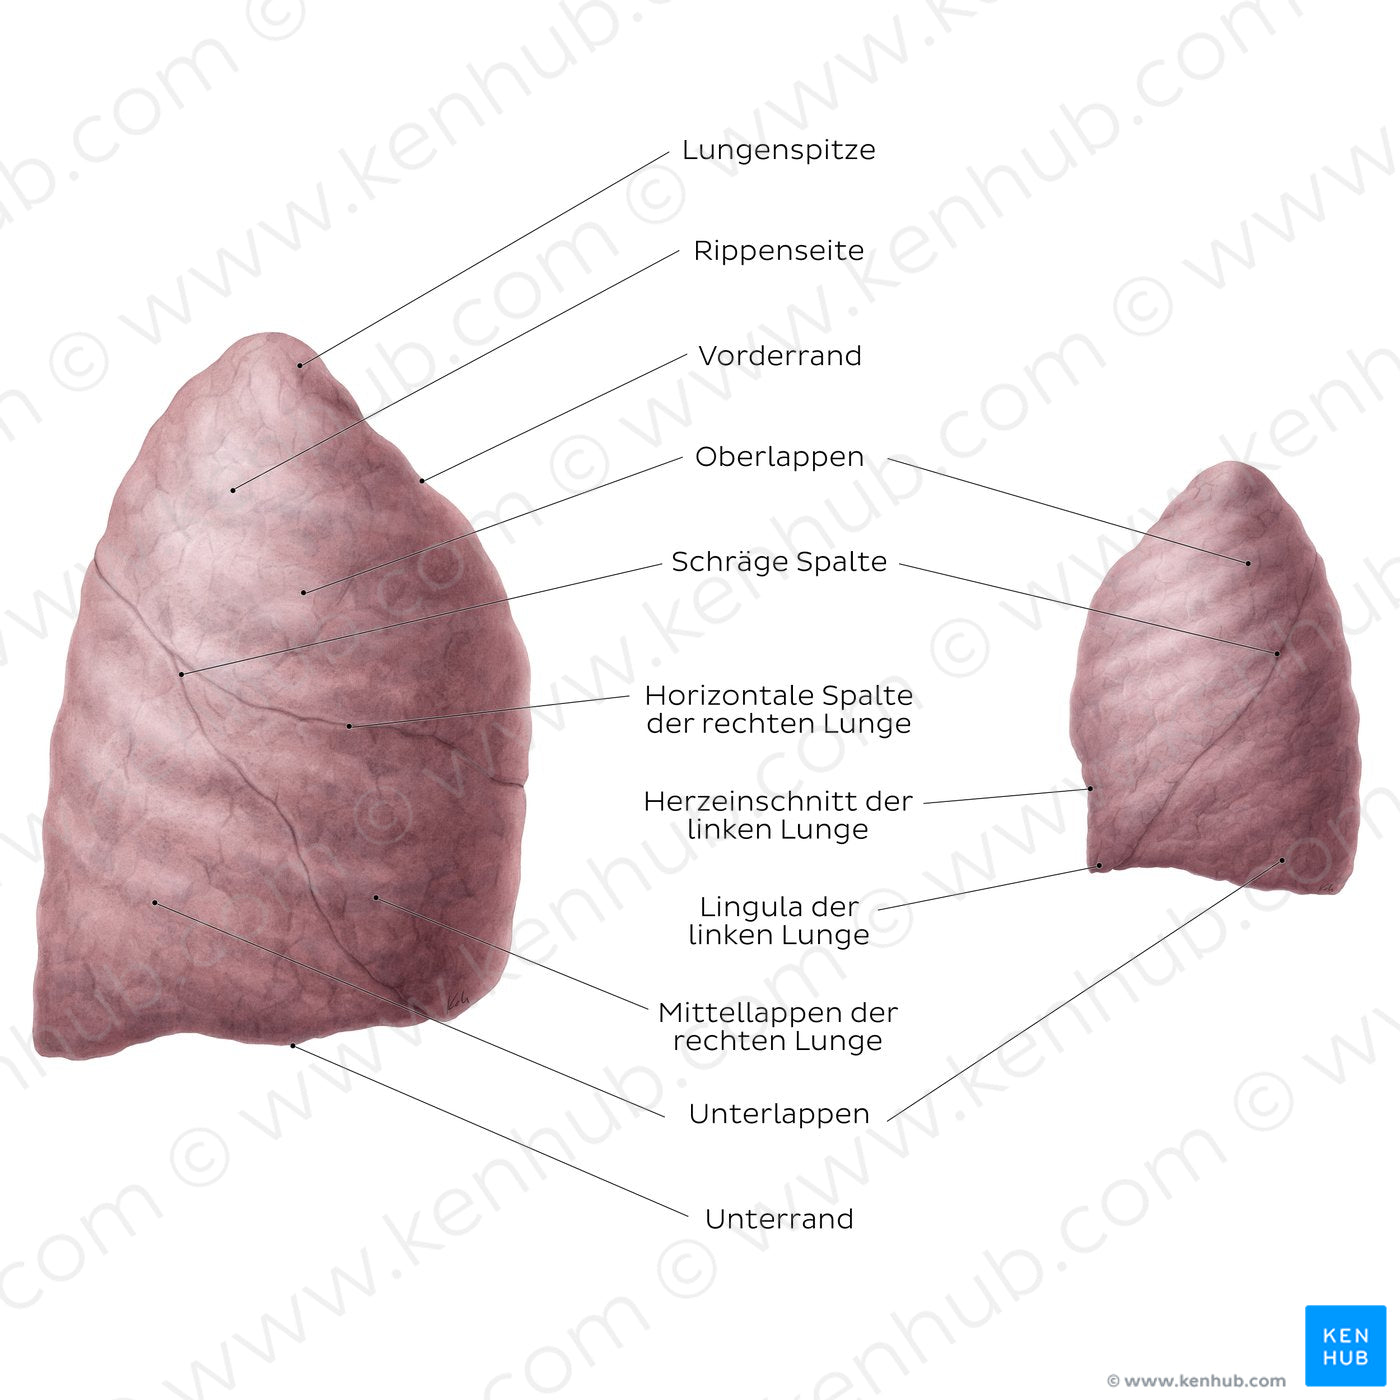 Lateral views of the lungs (German)